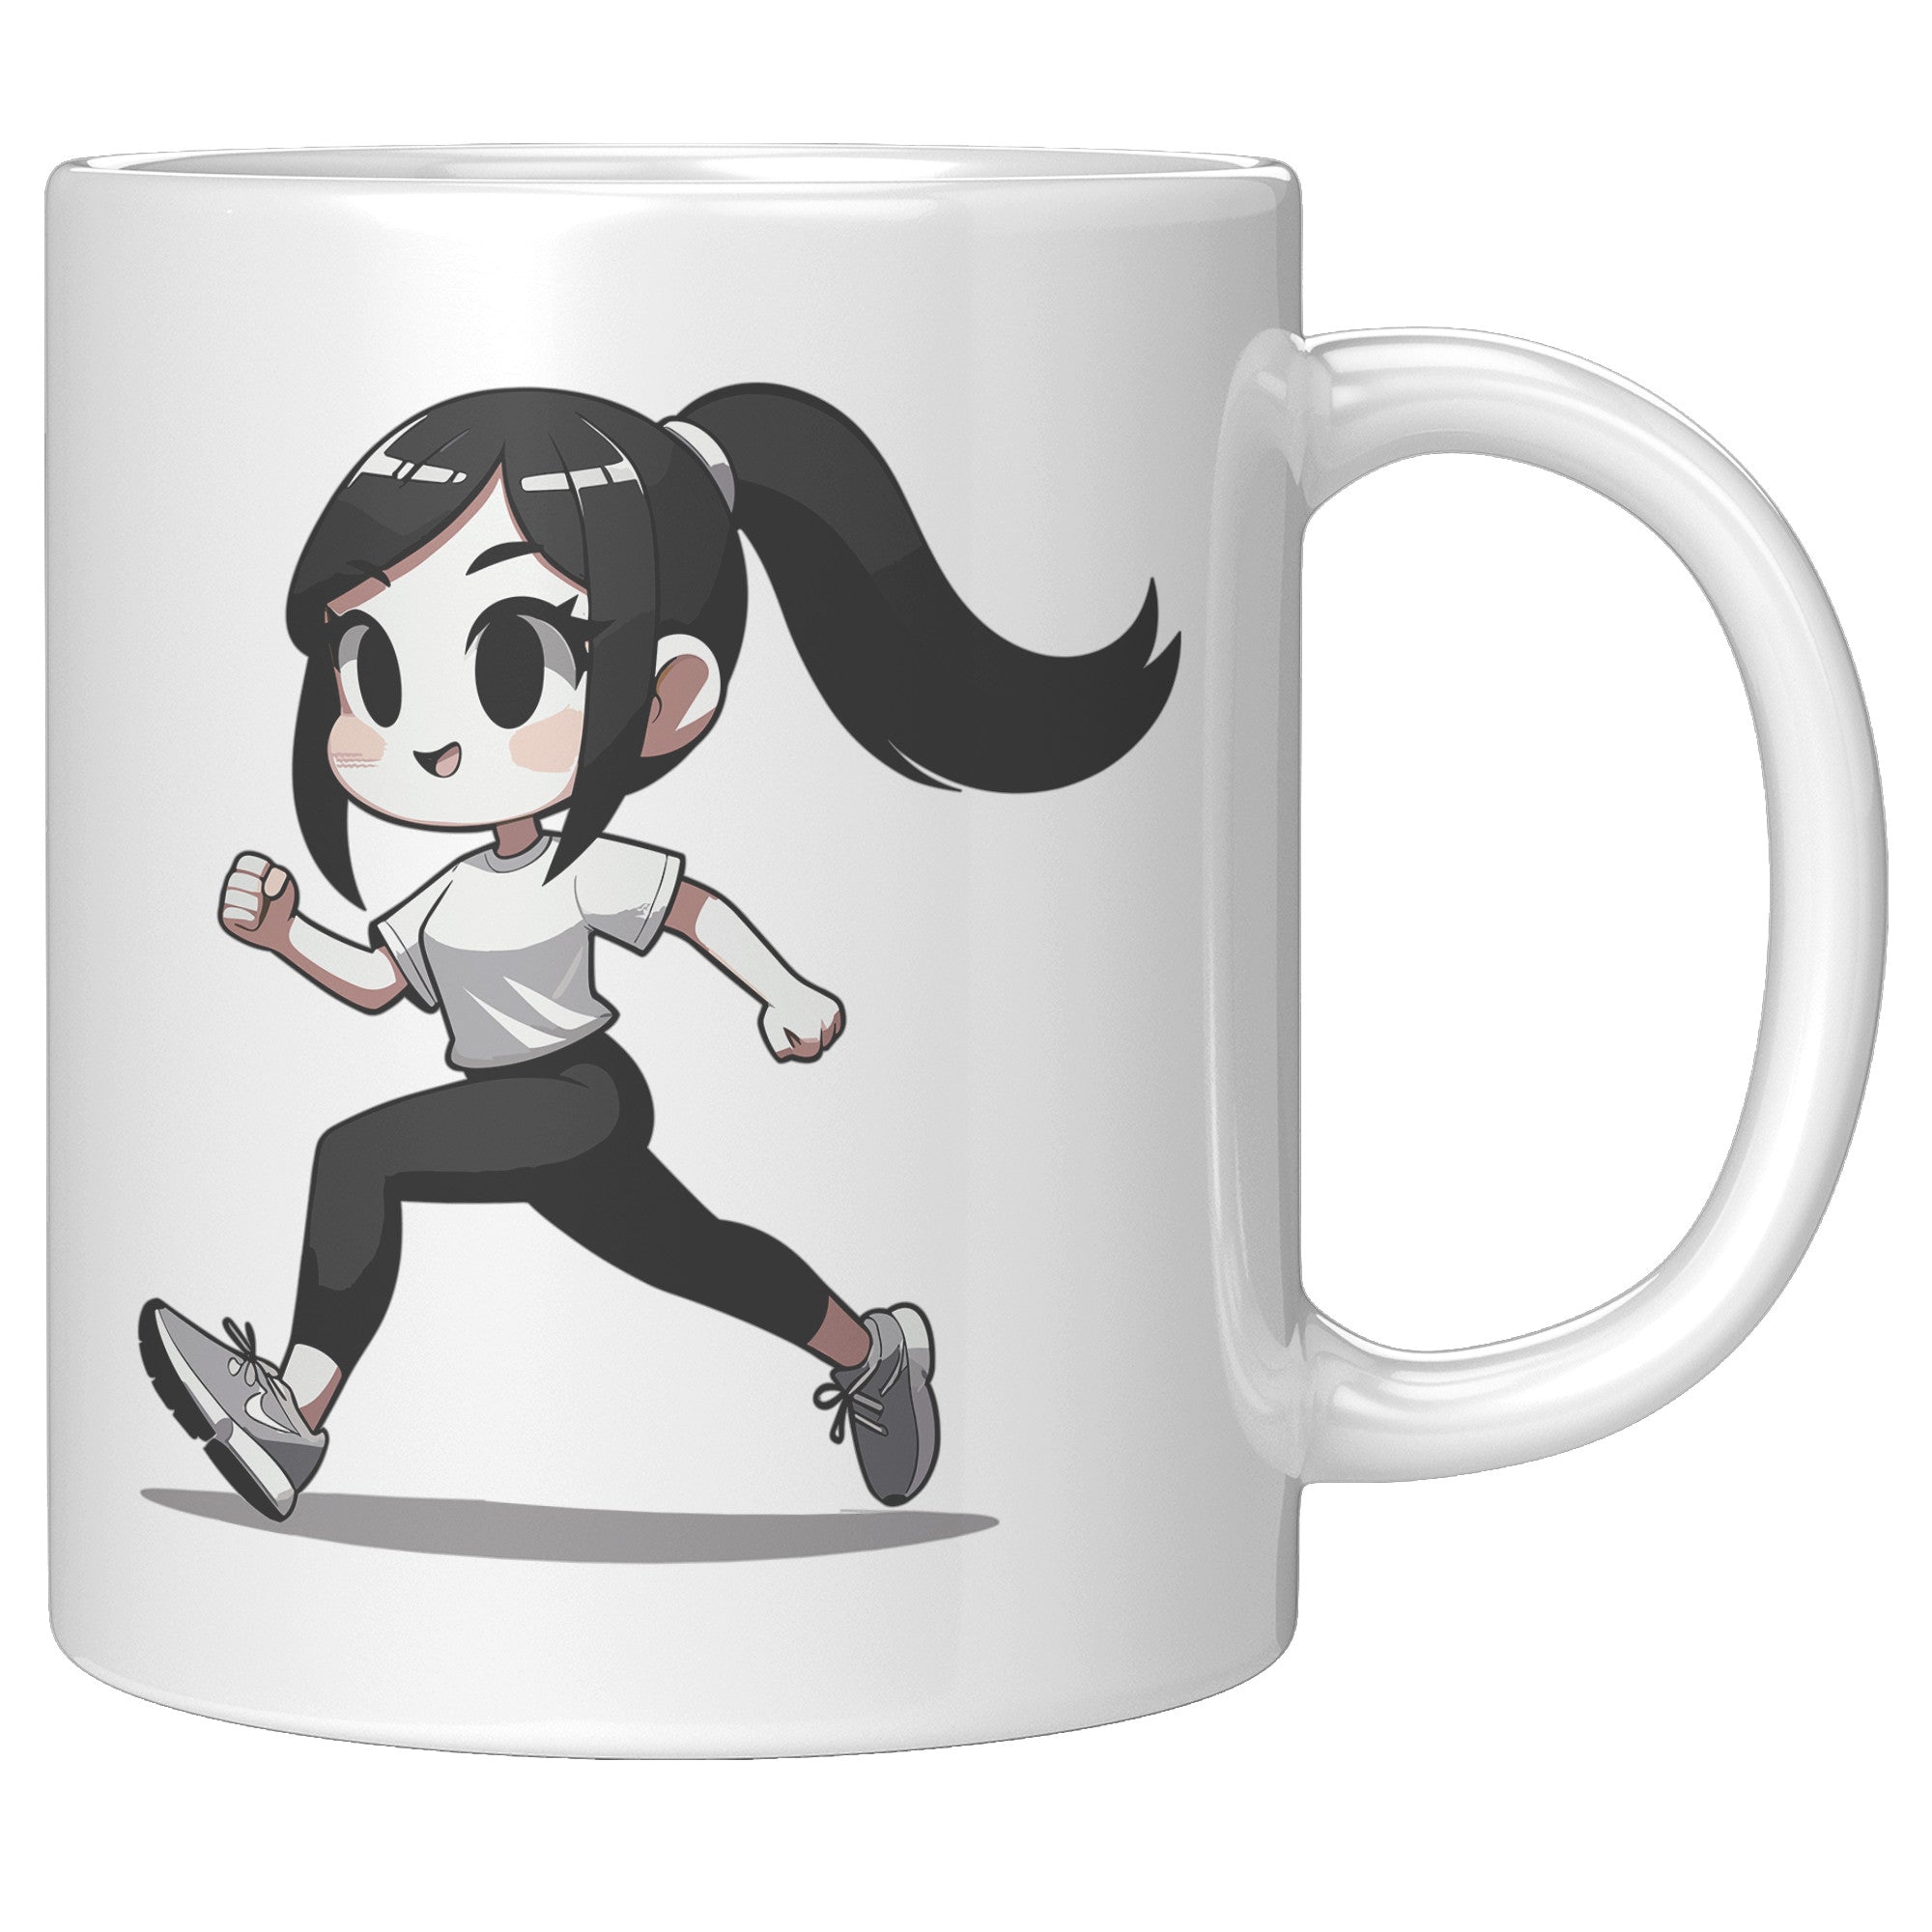 "Female Runner Coffee Mug - Inspirational Running Quotes Cup - Perfect Gift for Women Runners - Motivational Marathoner's Morning Brew" - F